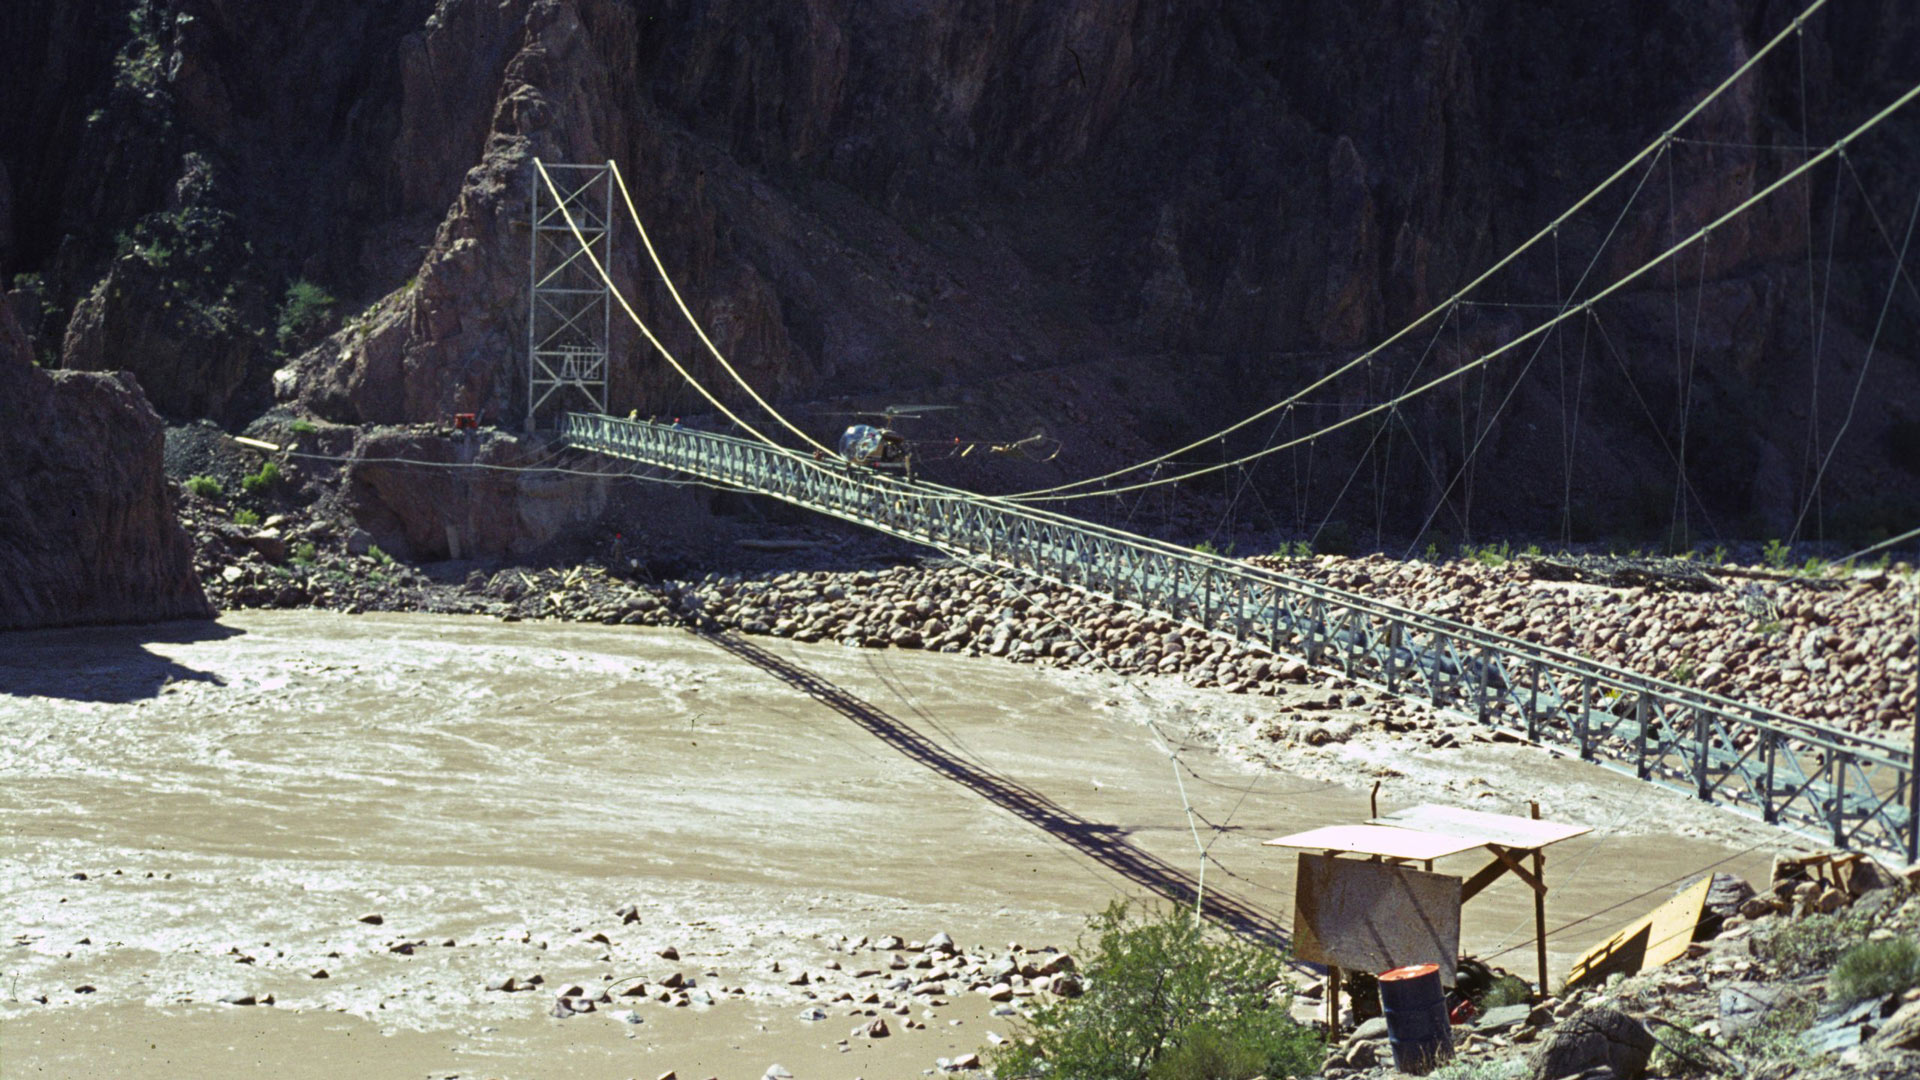 Construction on the Trans-Canyon Waterline started in 1965. This photo shows a contractor’s helicopter delivering materials to attach the pipe beneath the Silver Bridge over the Colorado River.